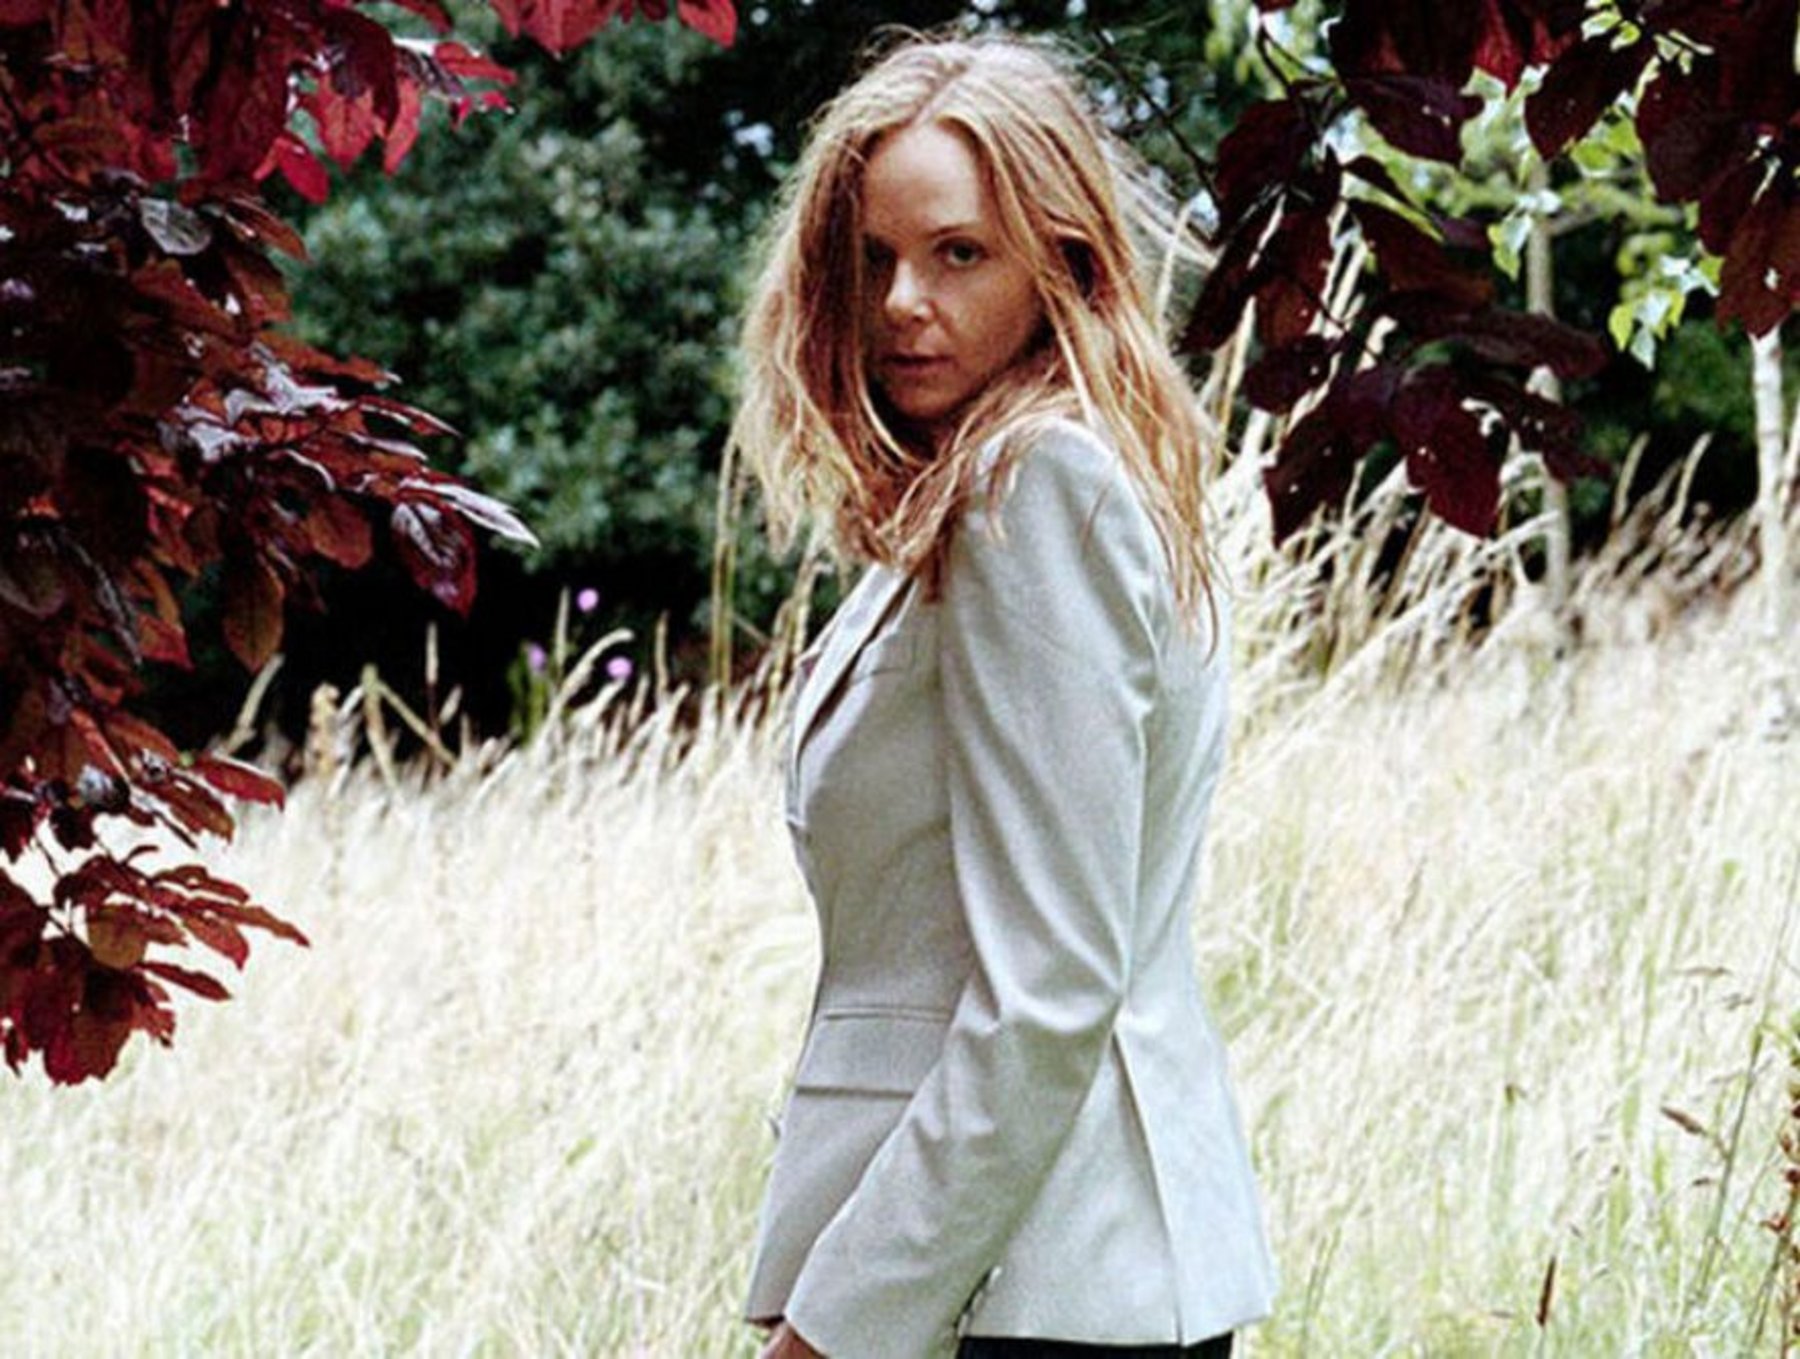 LVMH Signs Stella McCartney as Sustainability Fashion Focus Surges